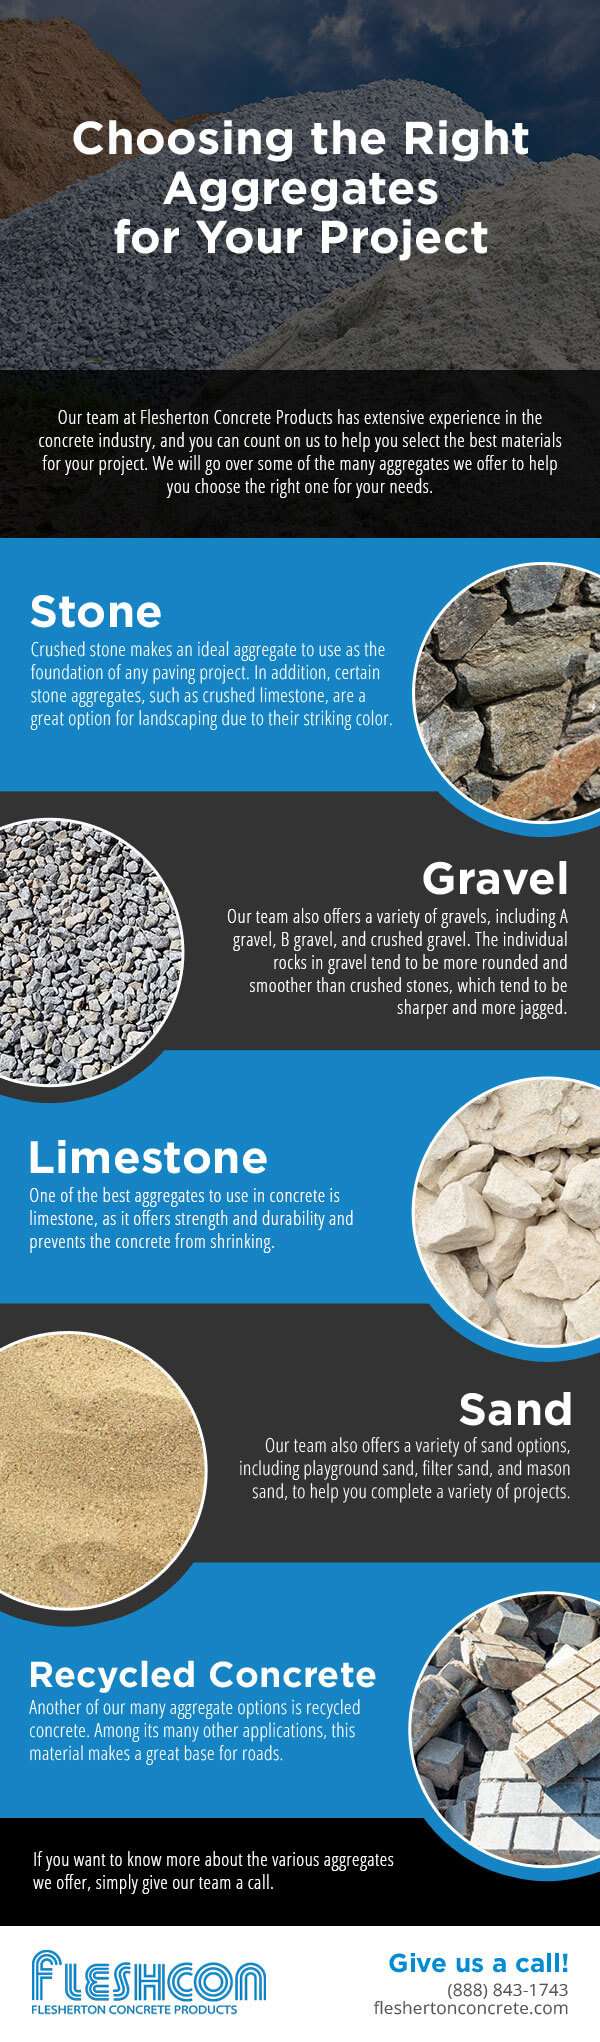 Choosing the Right Aggregates for Your Project